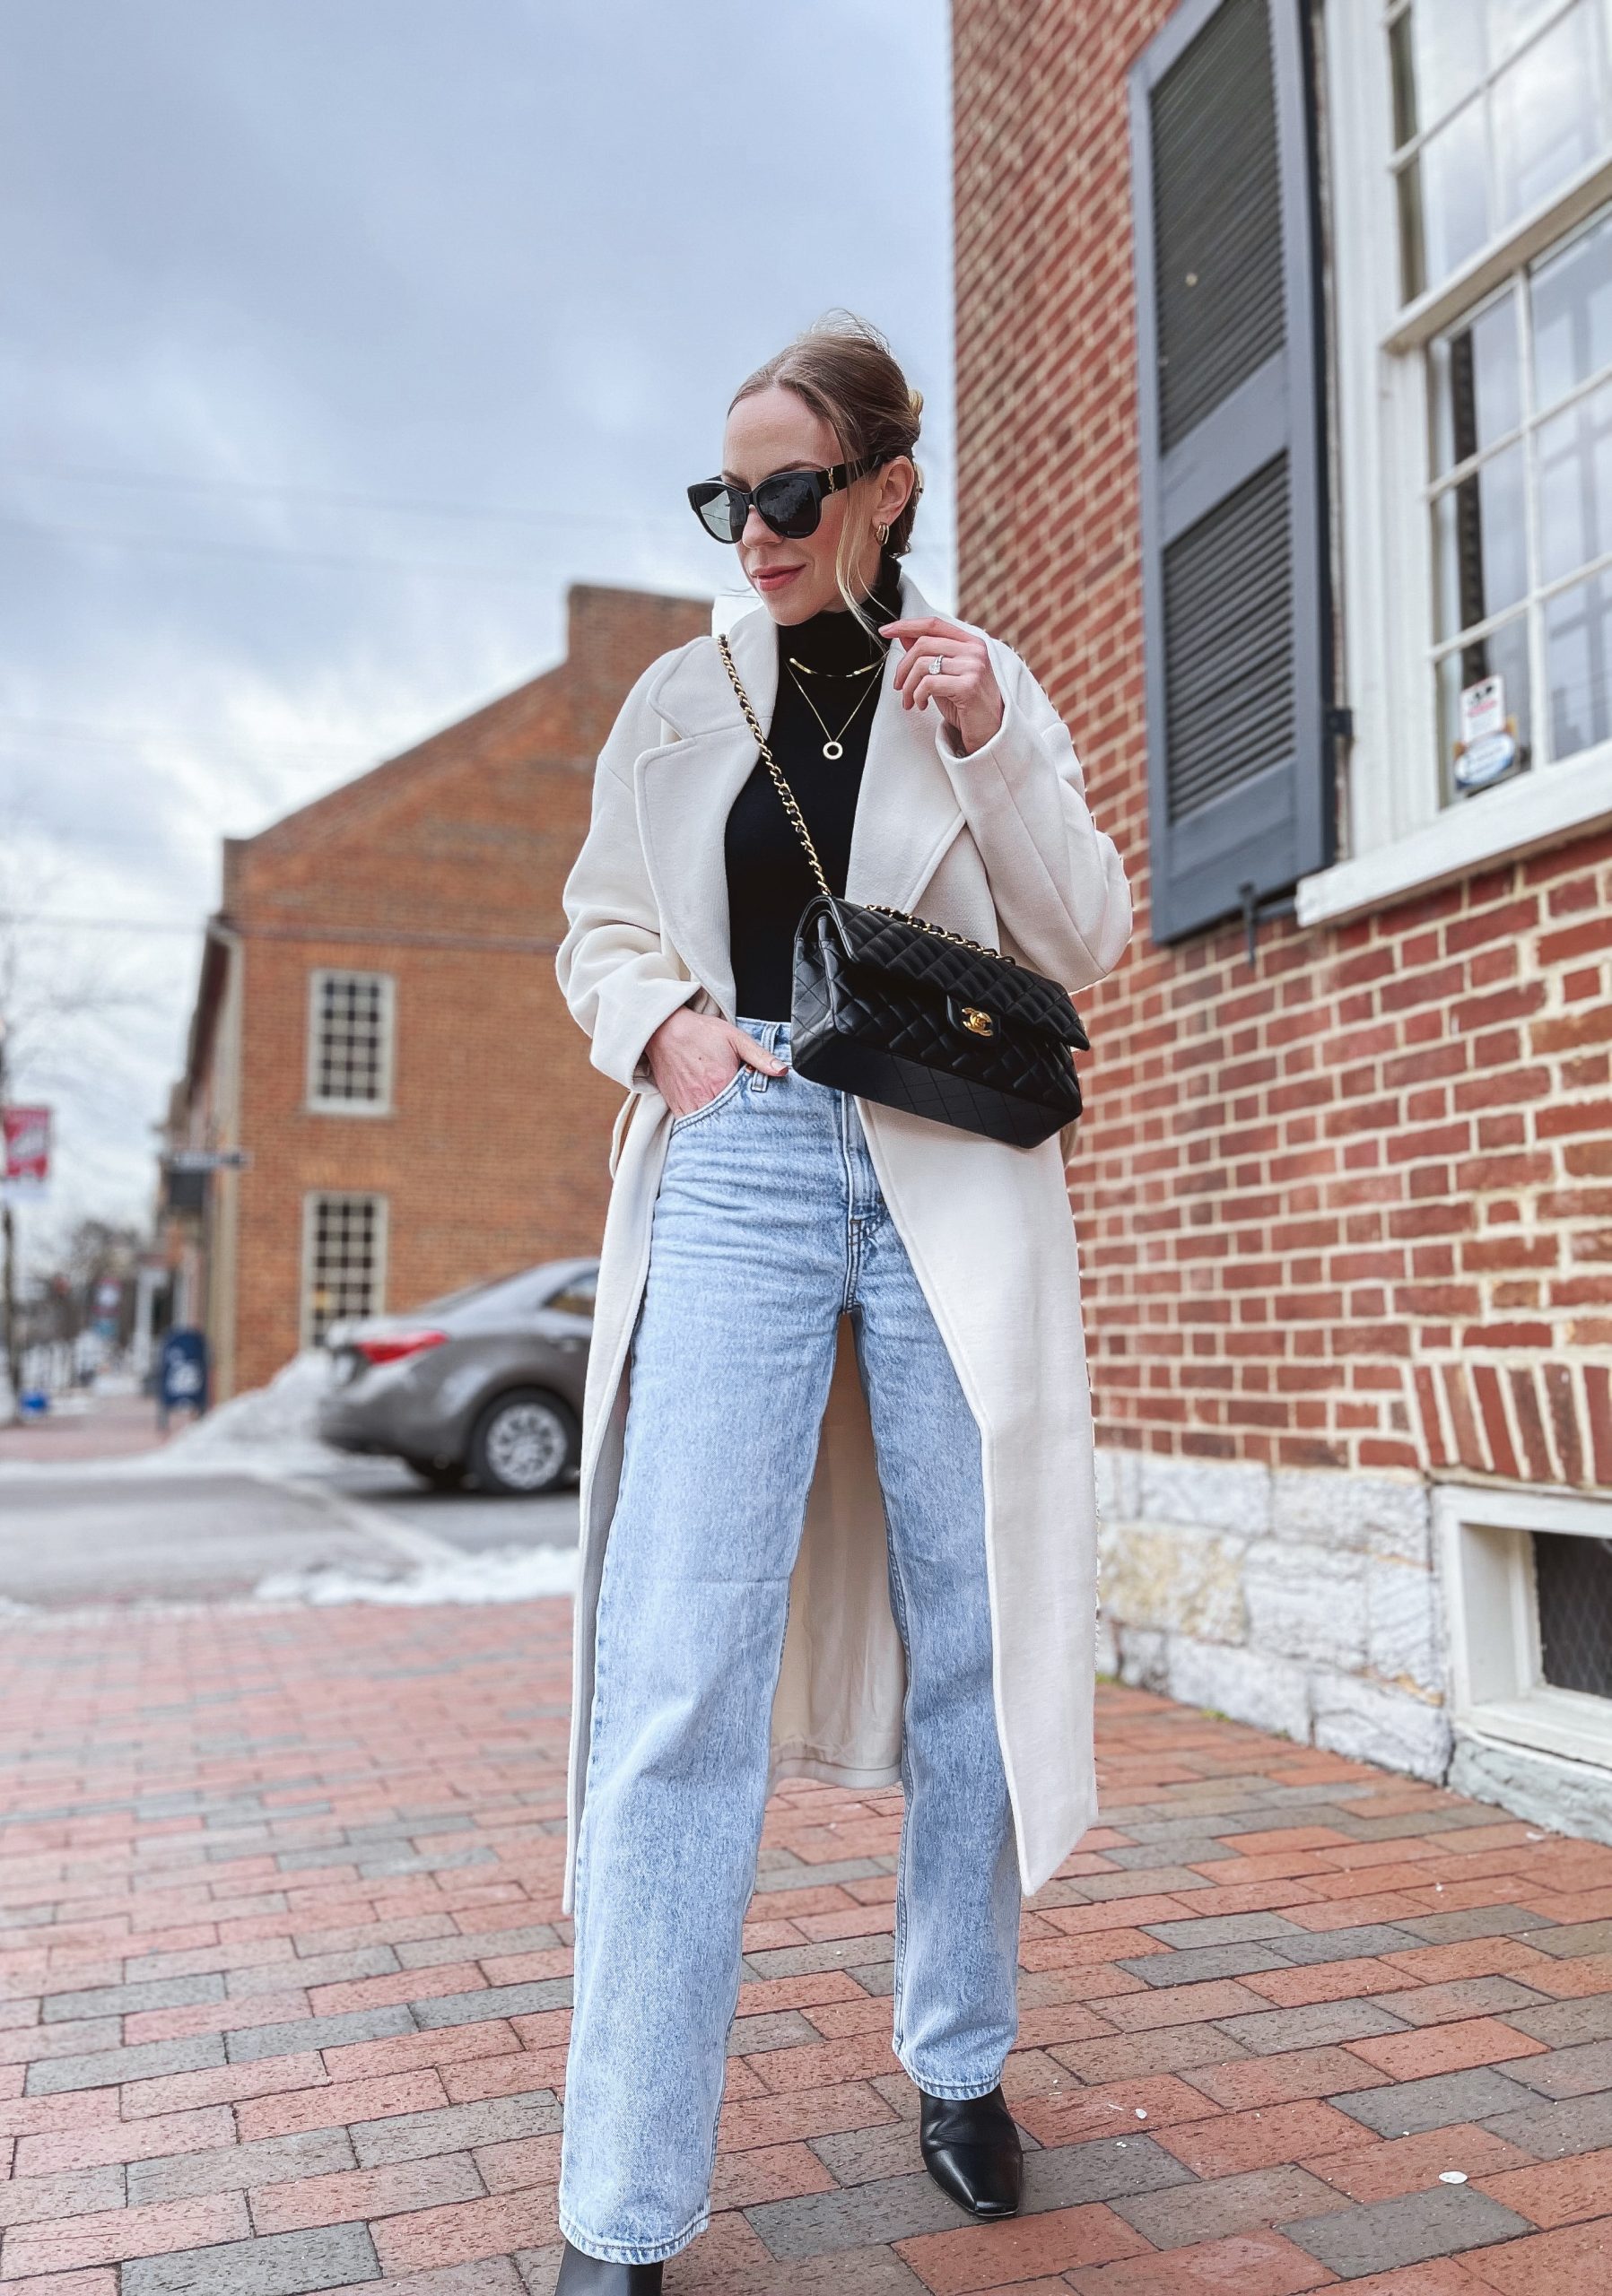 3 New Pairs of Jeans I'm Loving & Key Denim Trends for Spring 2022 -  Meagan's Moda